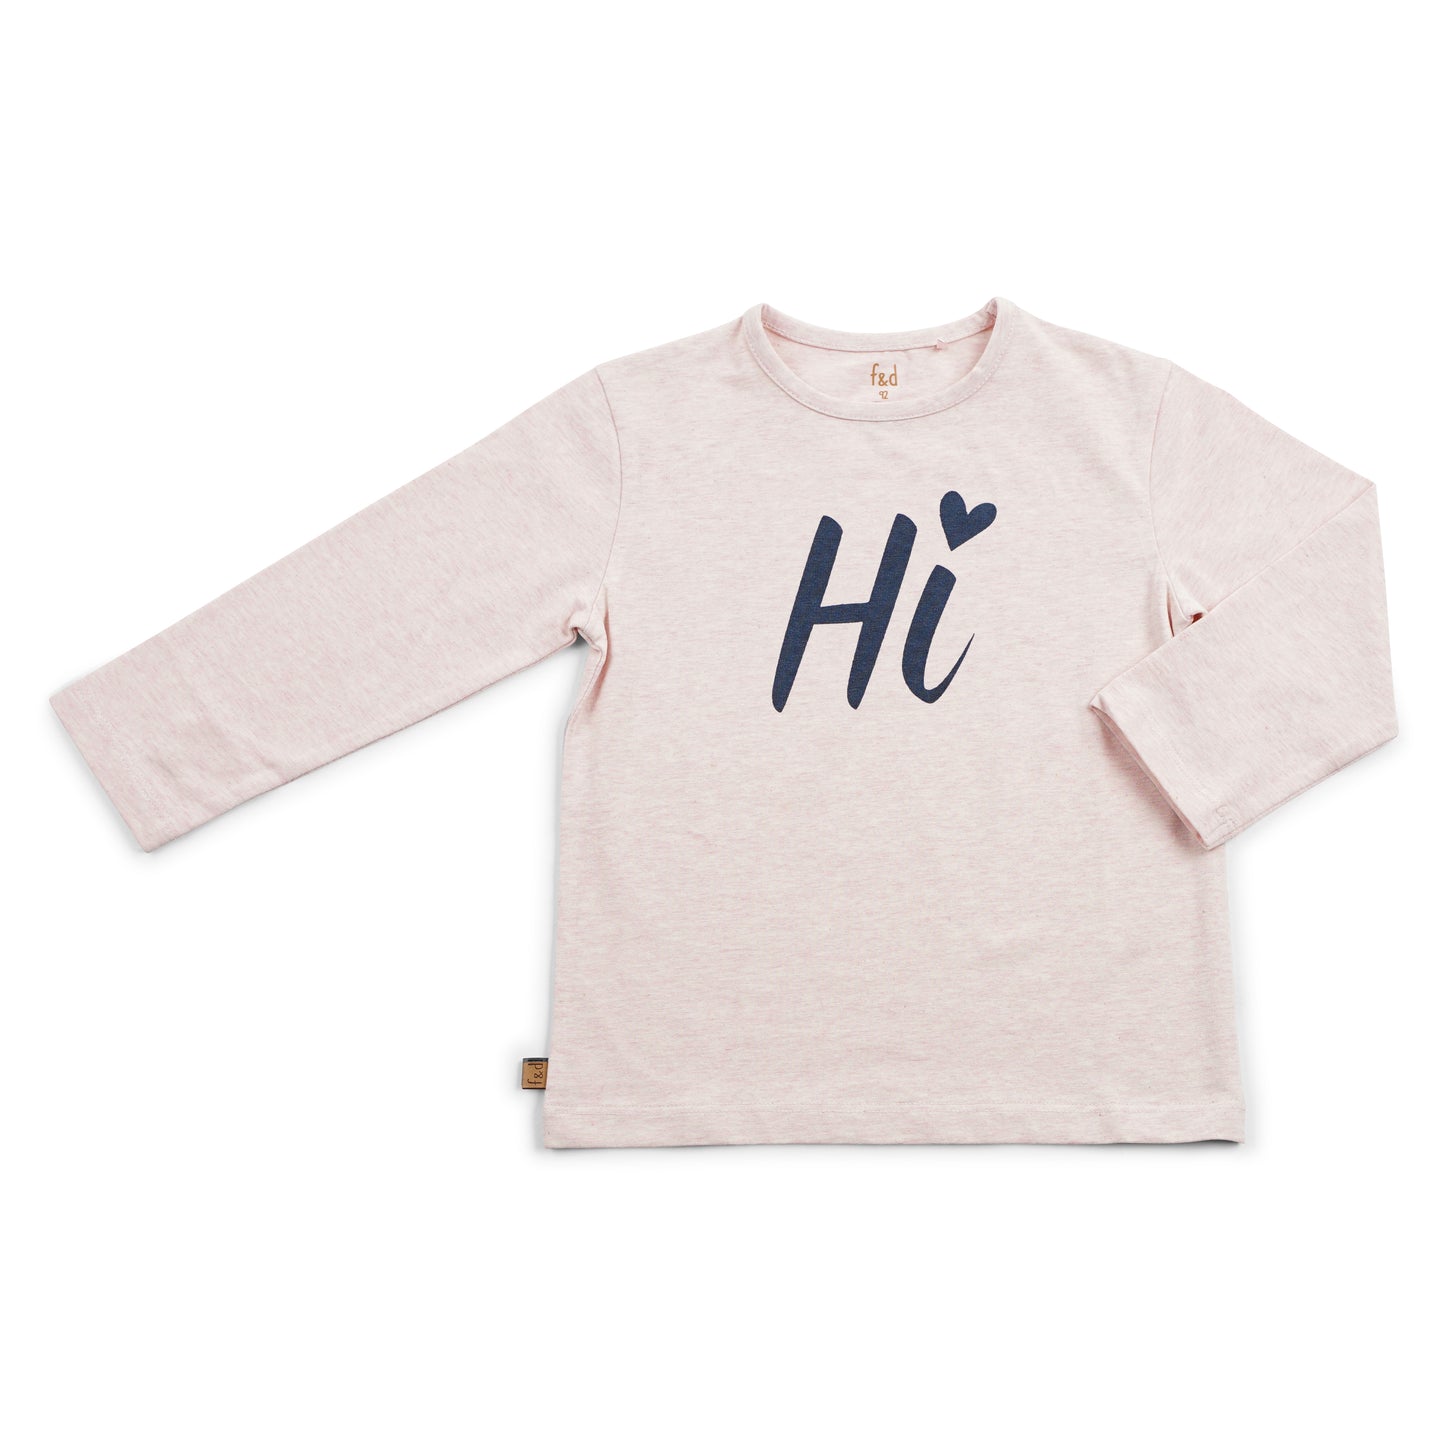 Frogs & Dogs - Shirt Hi LS - Pink